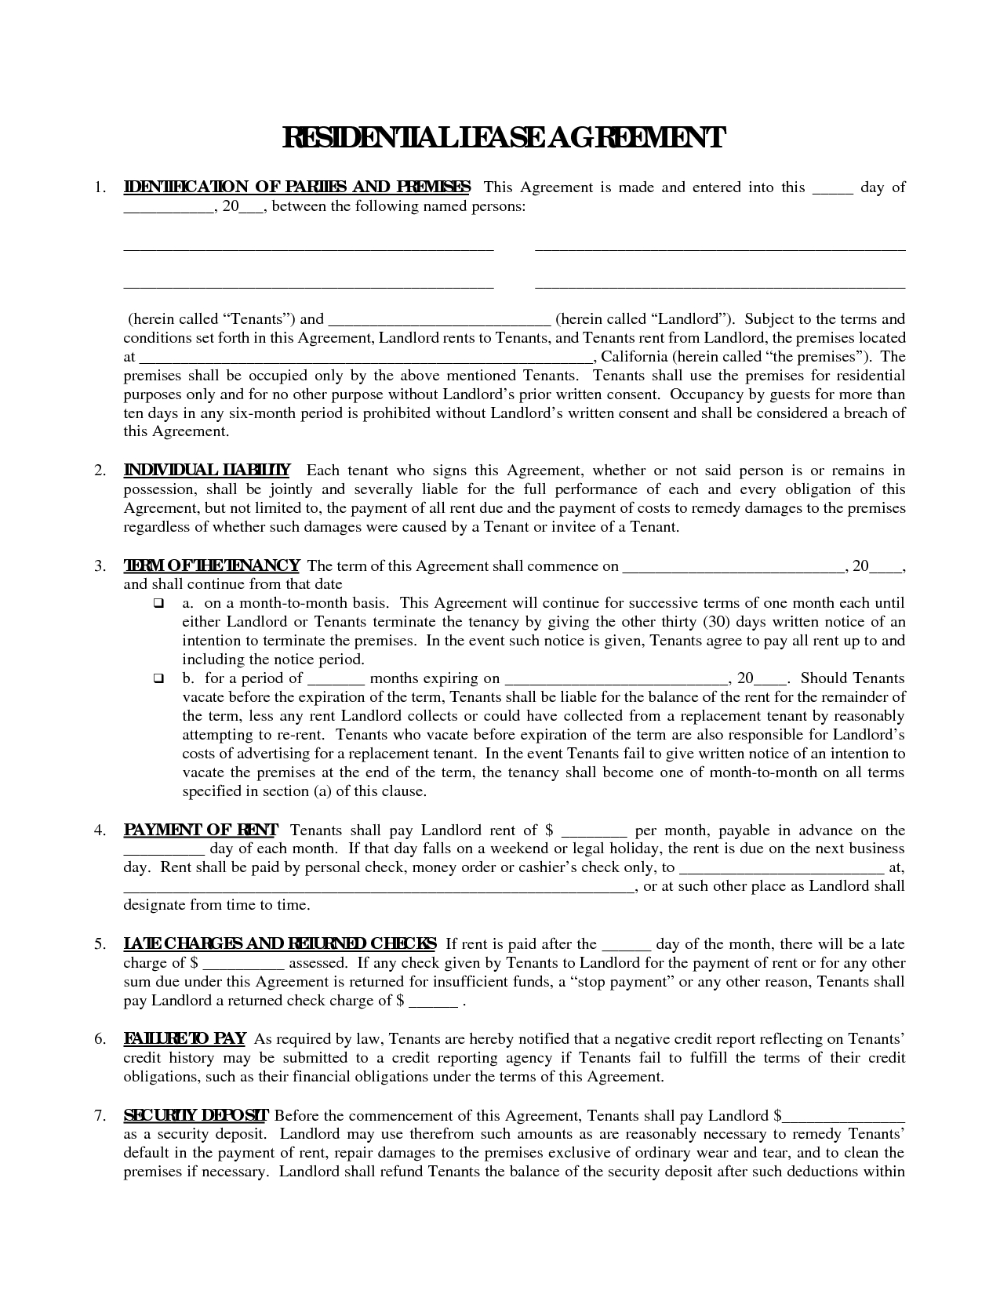 007 Free Residential Lease Agreement Template Ideas Forms To Print In Business Lease Agreement Temp Rental Agreement Templates Lease Agreement Being A Landlord - Blank Lease Agreement Free Printable